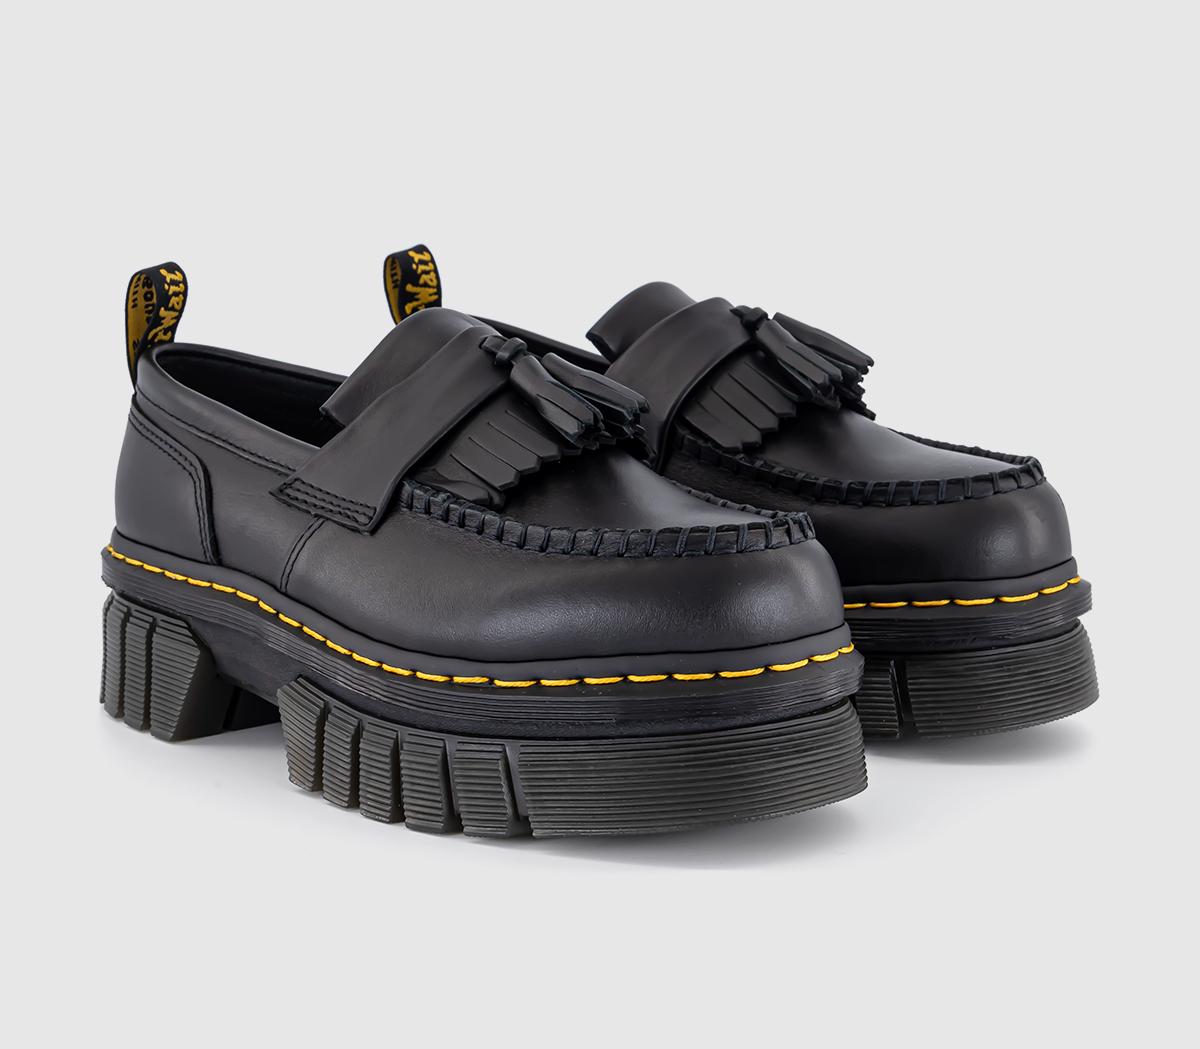 Dr. Martens Womens Adrian Audrick Loafers Black, 7